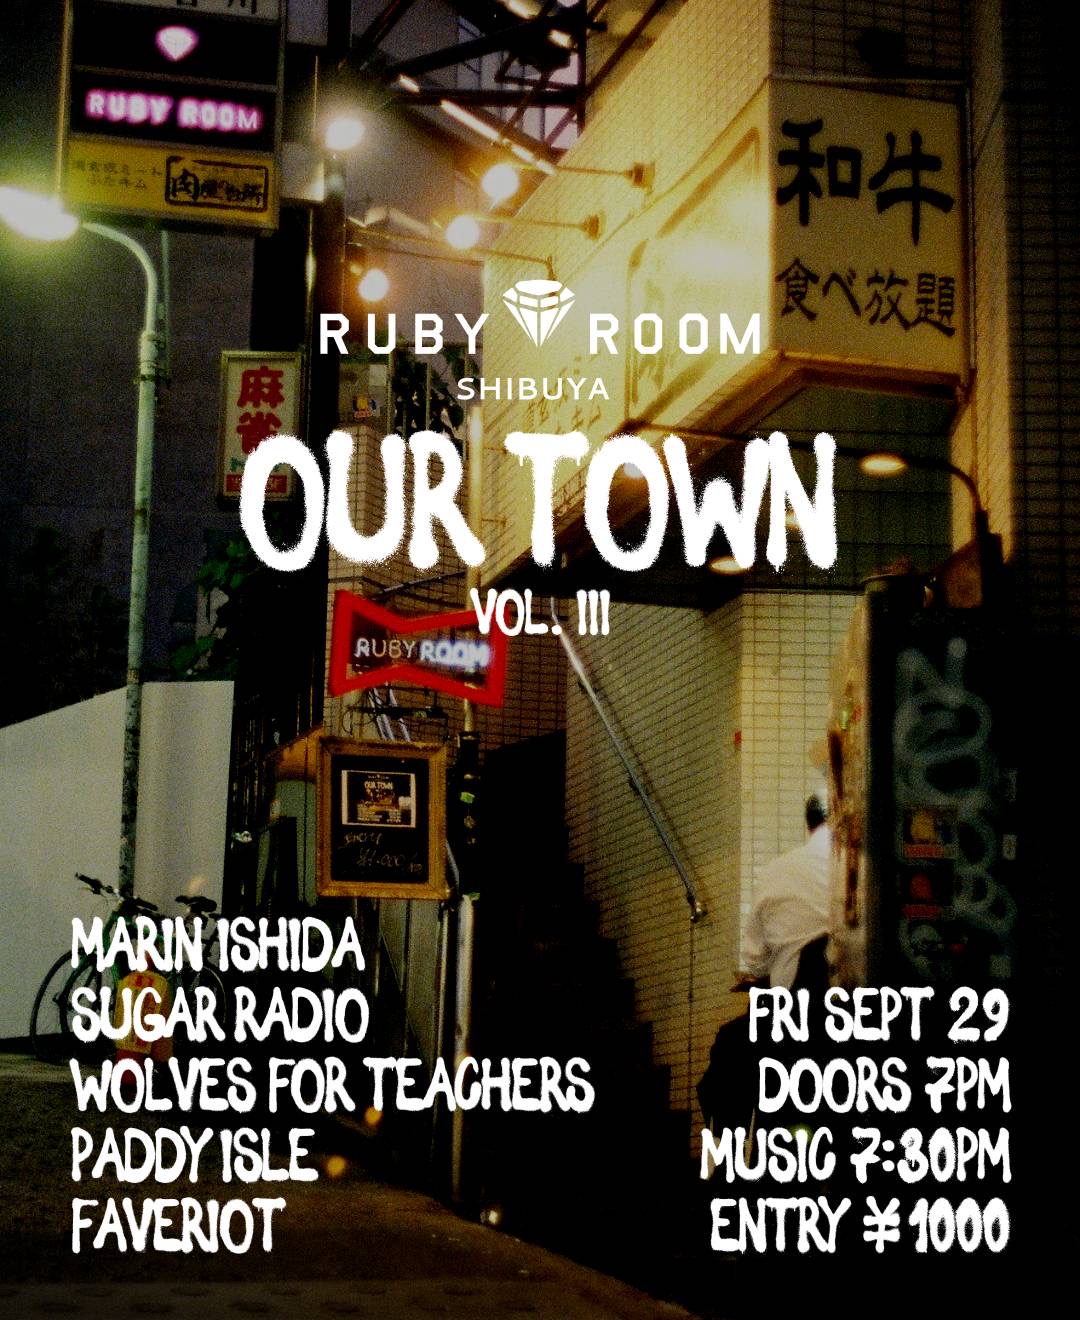 OUR TOWN - Ruby Room